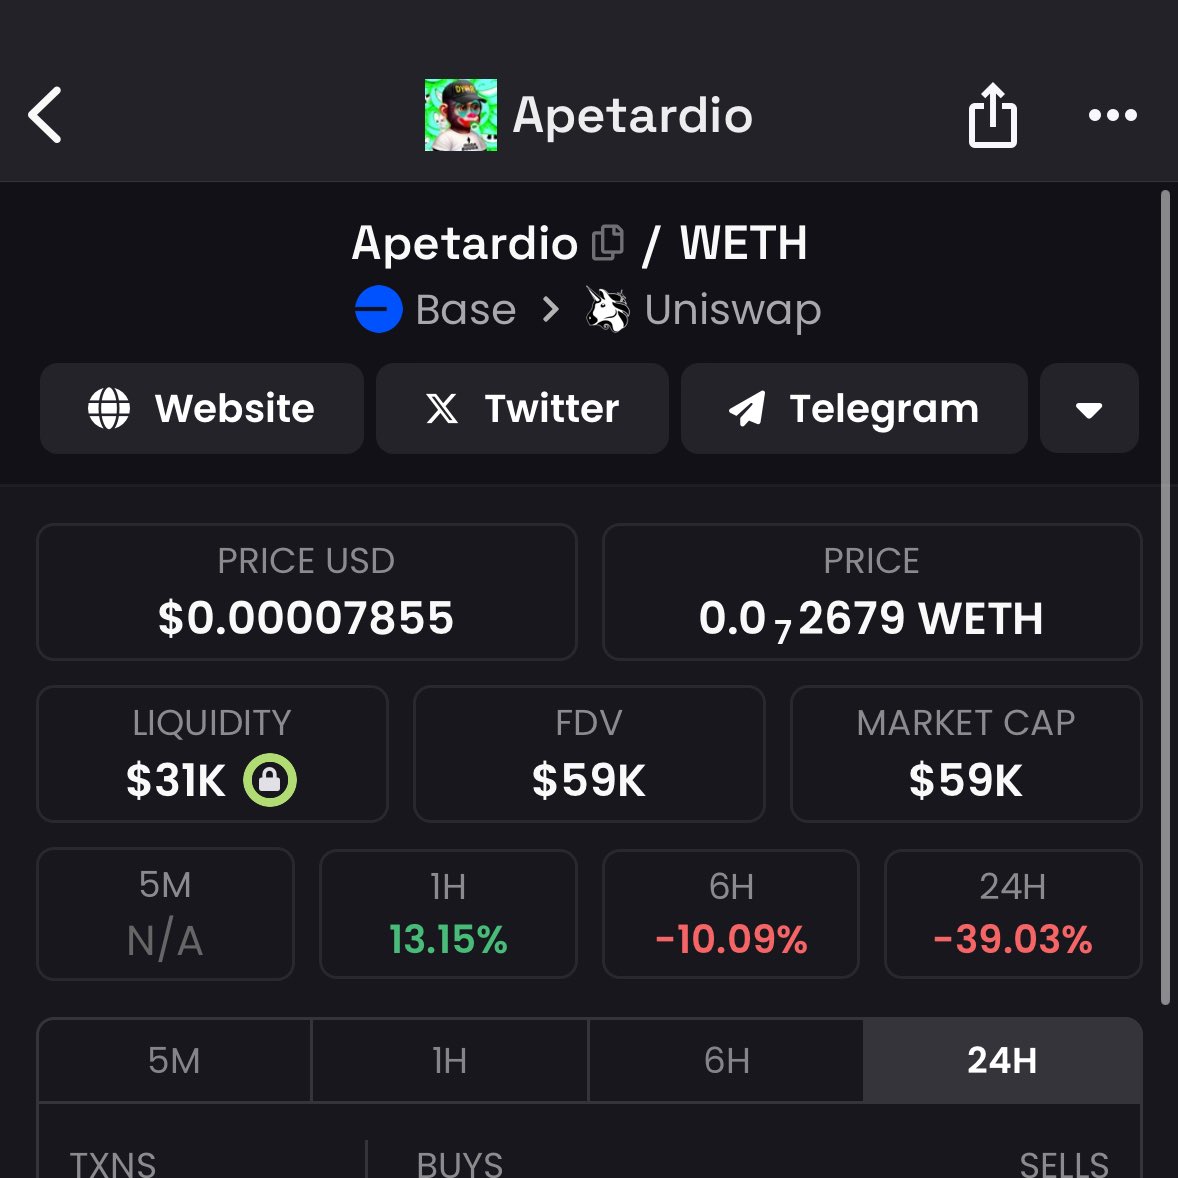 #Apetardio Looks Bottomed Here I Am With Size. Be Early To Something For Once Easy 100x In The Coming Months. 0xe161bE4a74AB8FA8706a2D03e67c02318d0a0ad6